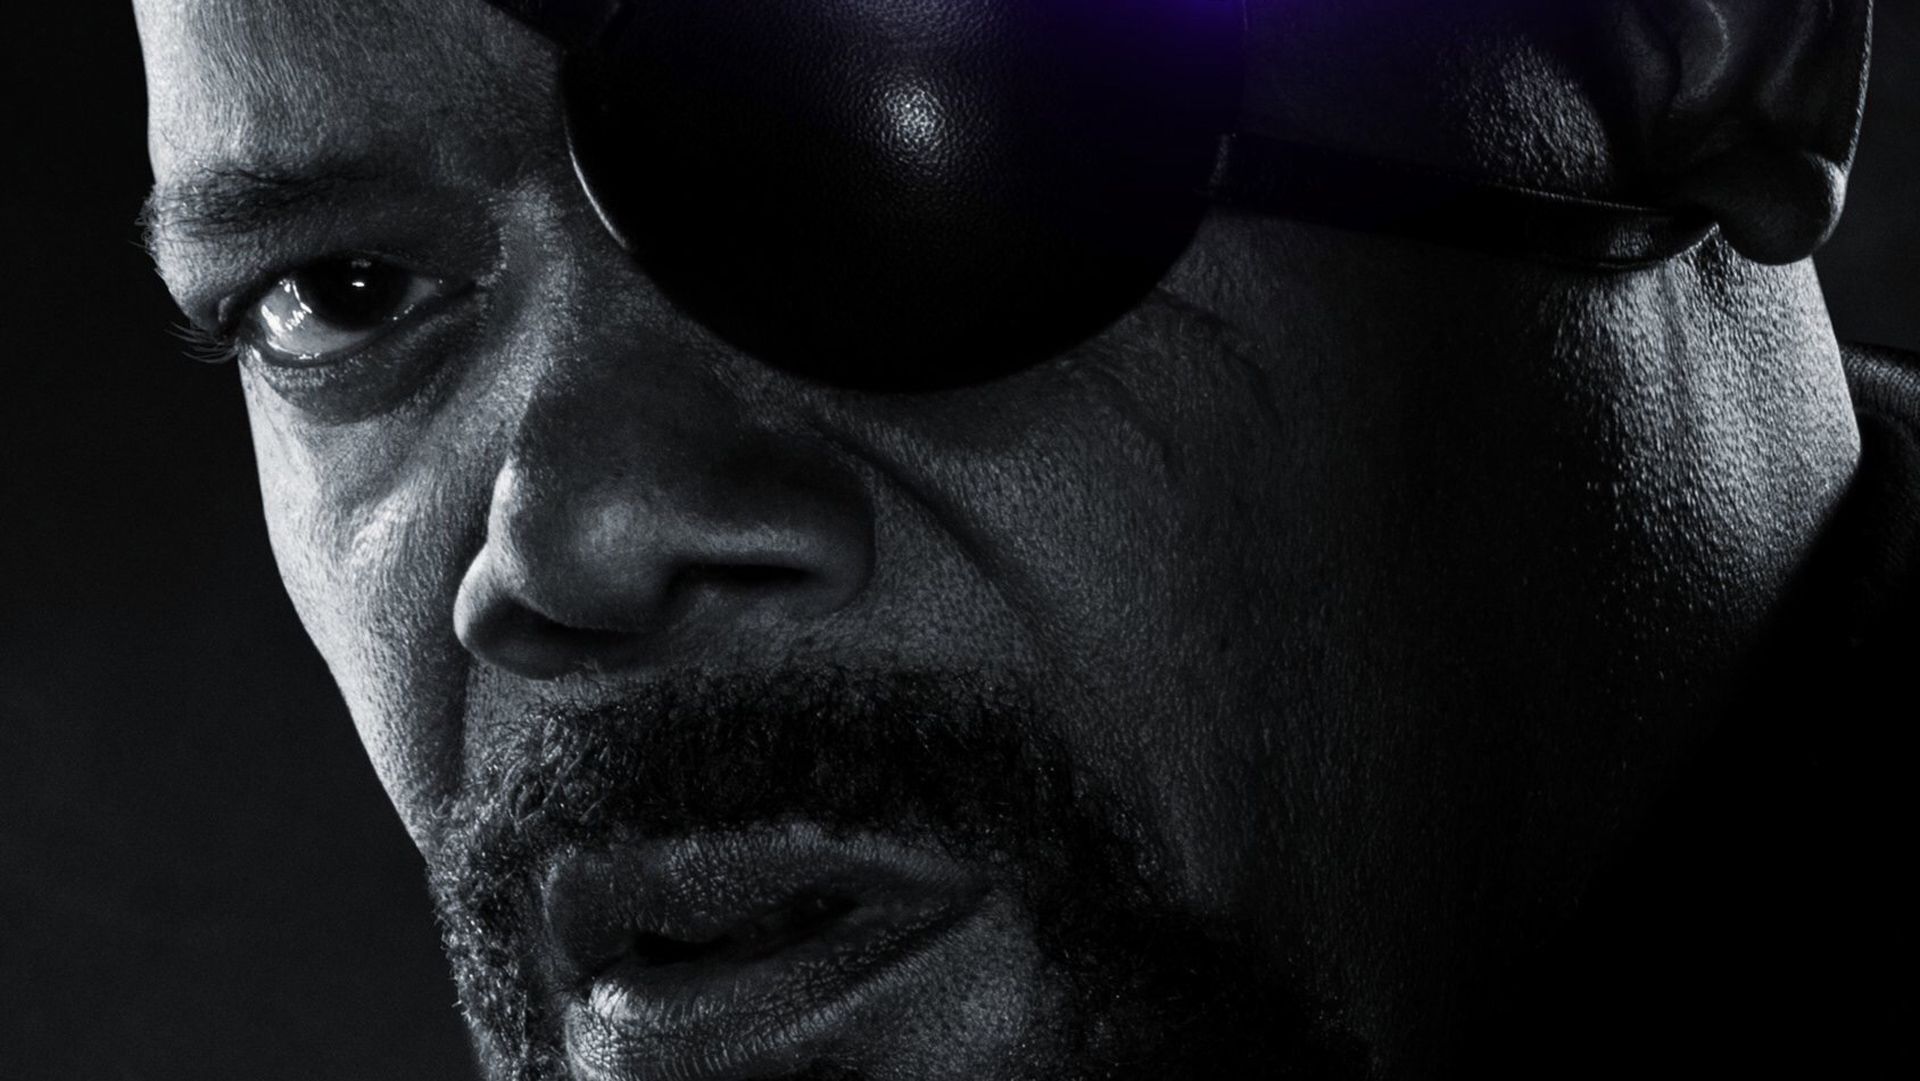 Nick Fury Avengers Endgame 2019 Poster, HD Movies, 4k Wallpaper, Image, Background, Photo and Picture